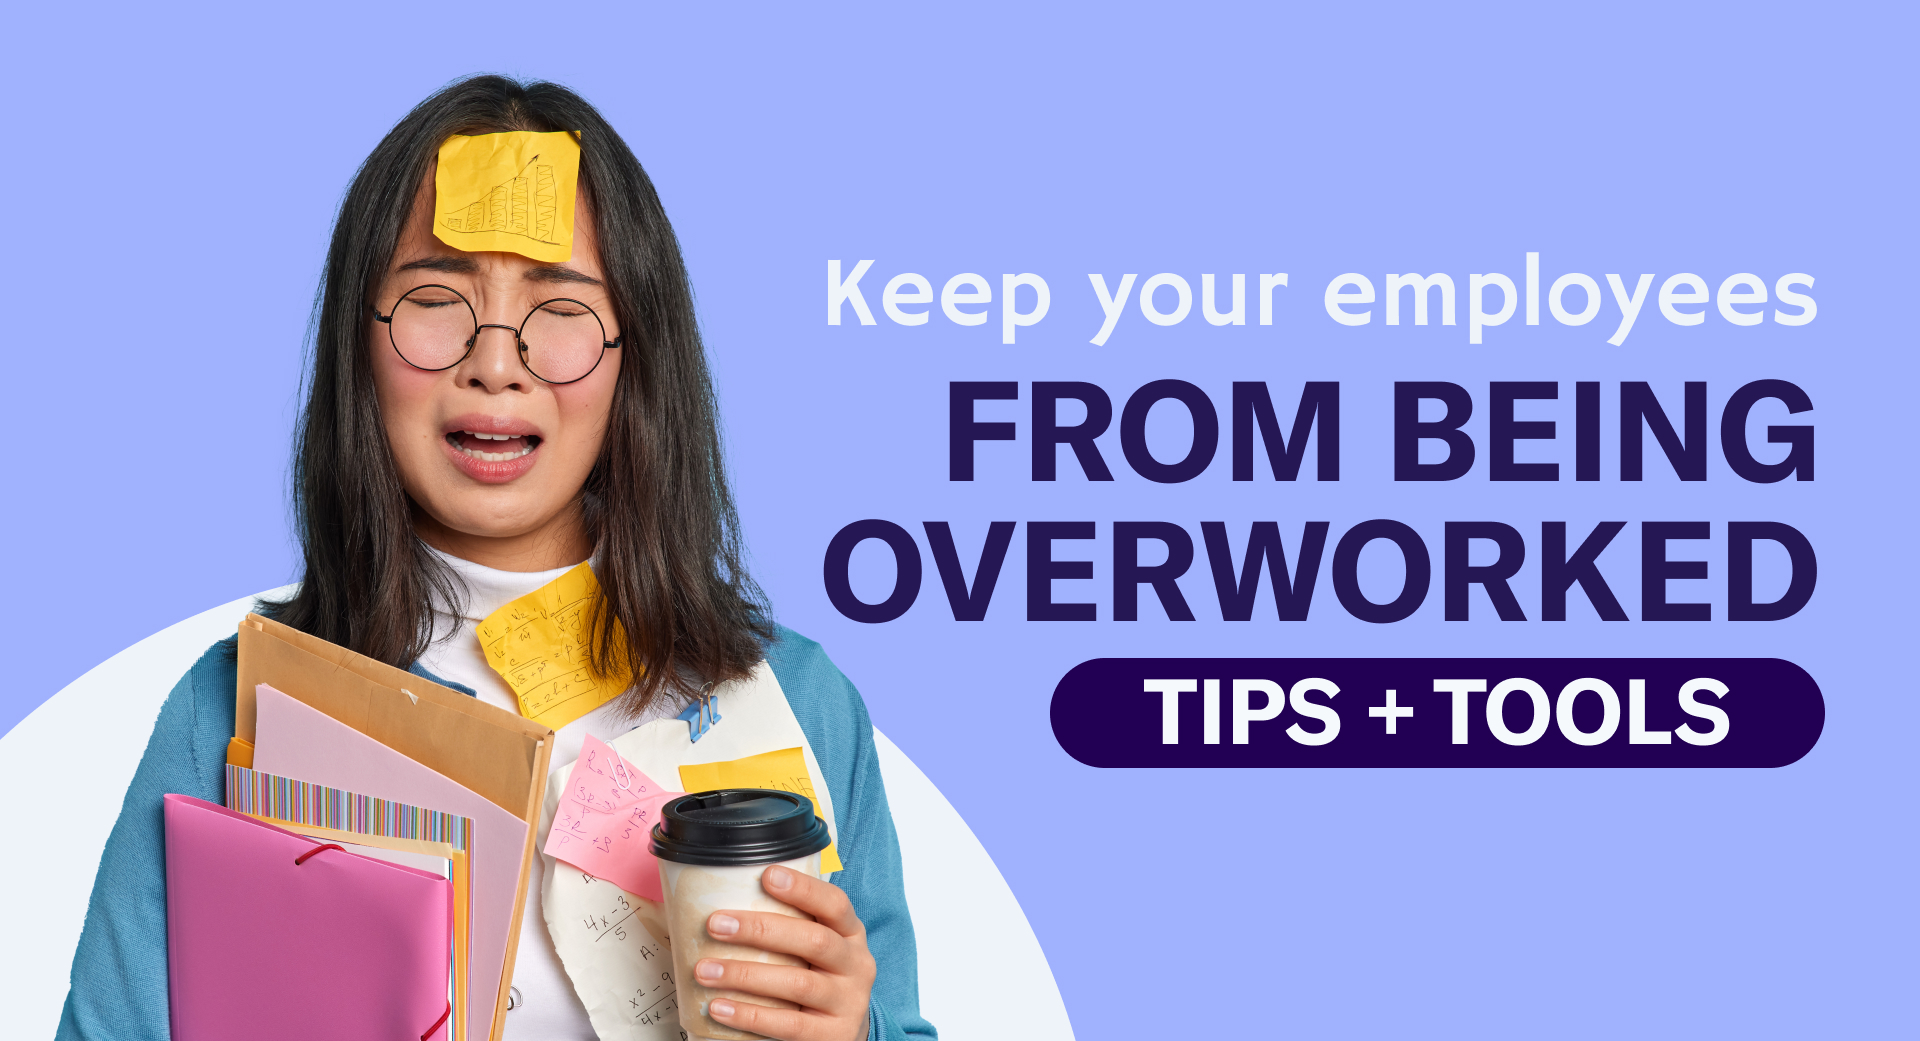 Keep Your Employees From Being Overworked (Tips + Tools) How You Can Stop Overworking Employees